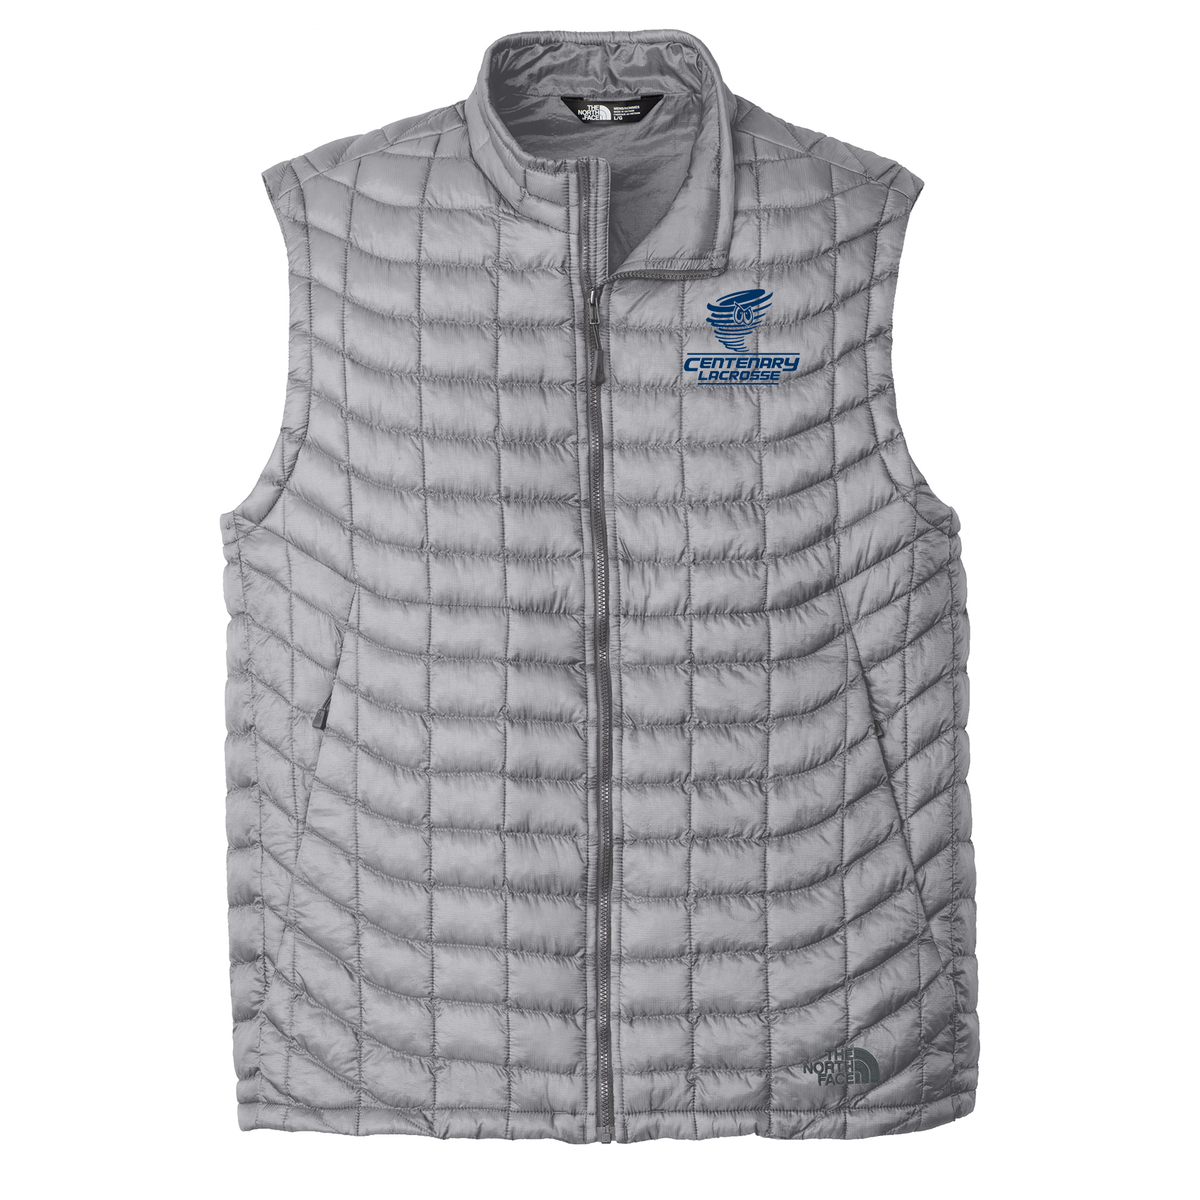 Centenary University Mens Lacrosse The North Face Thermoball Vest